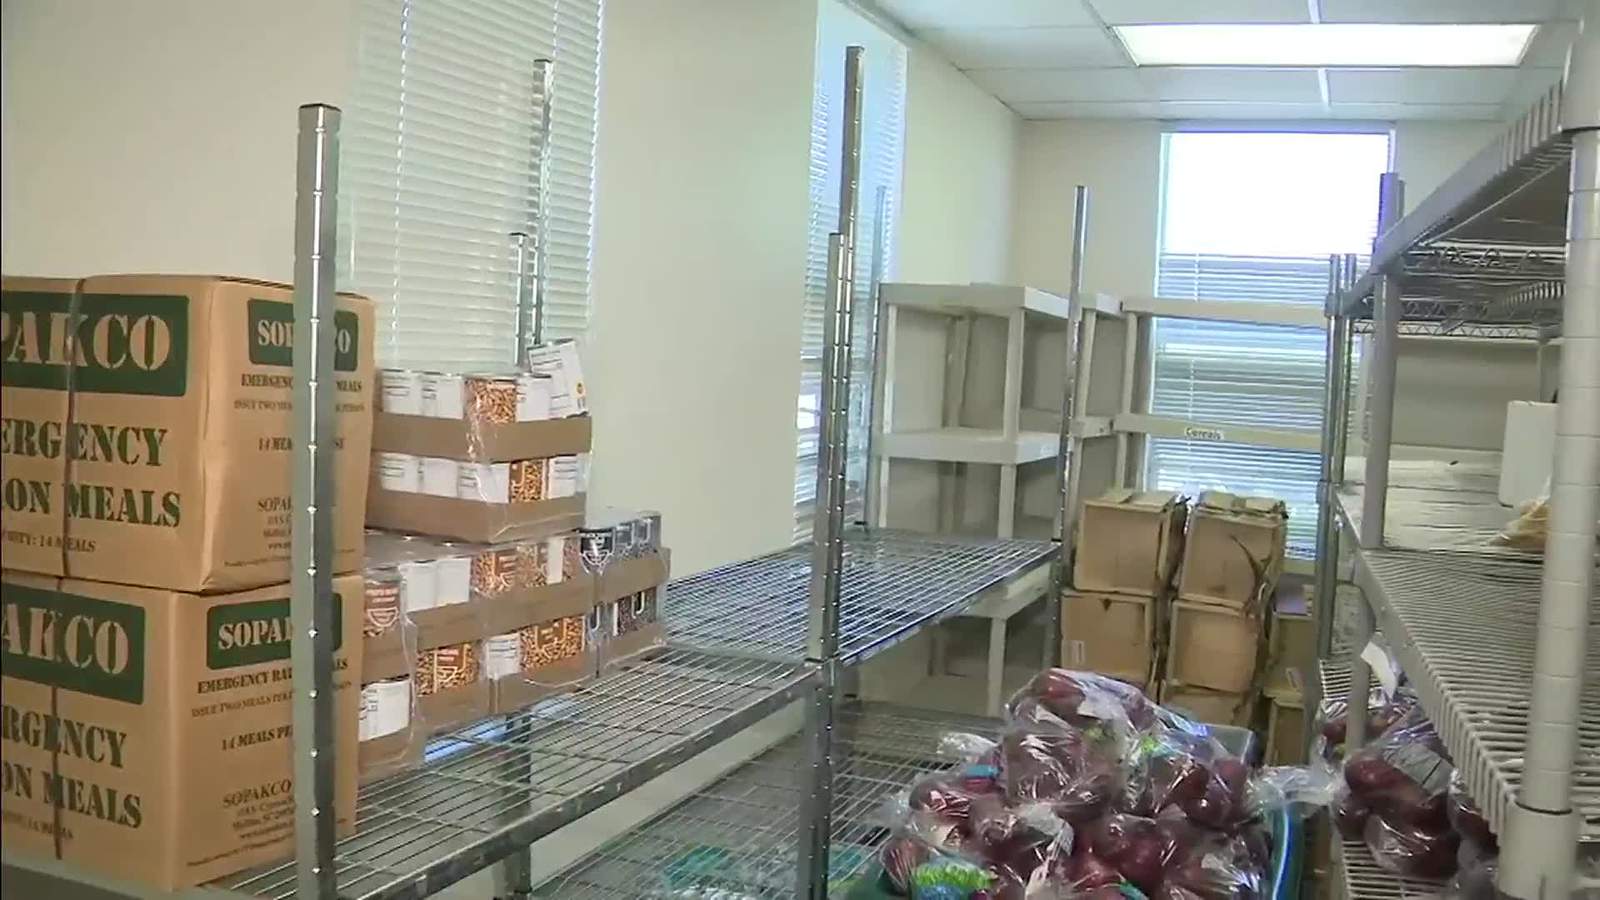 Hungry families tripling in need at Salvation Army food pantry